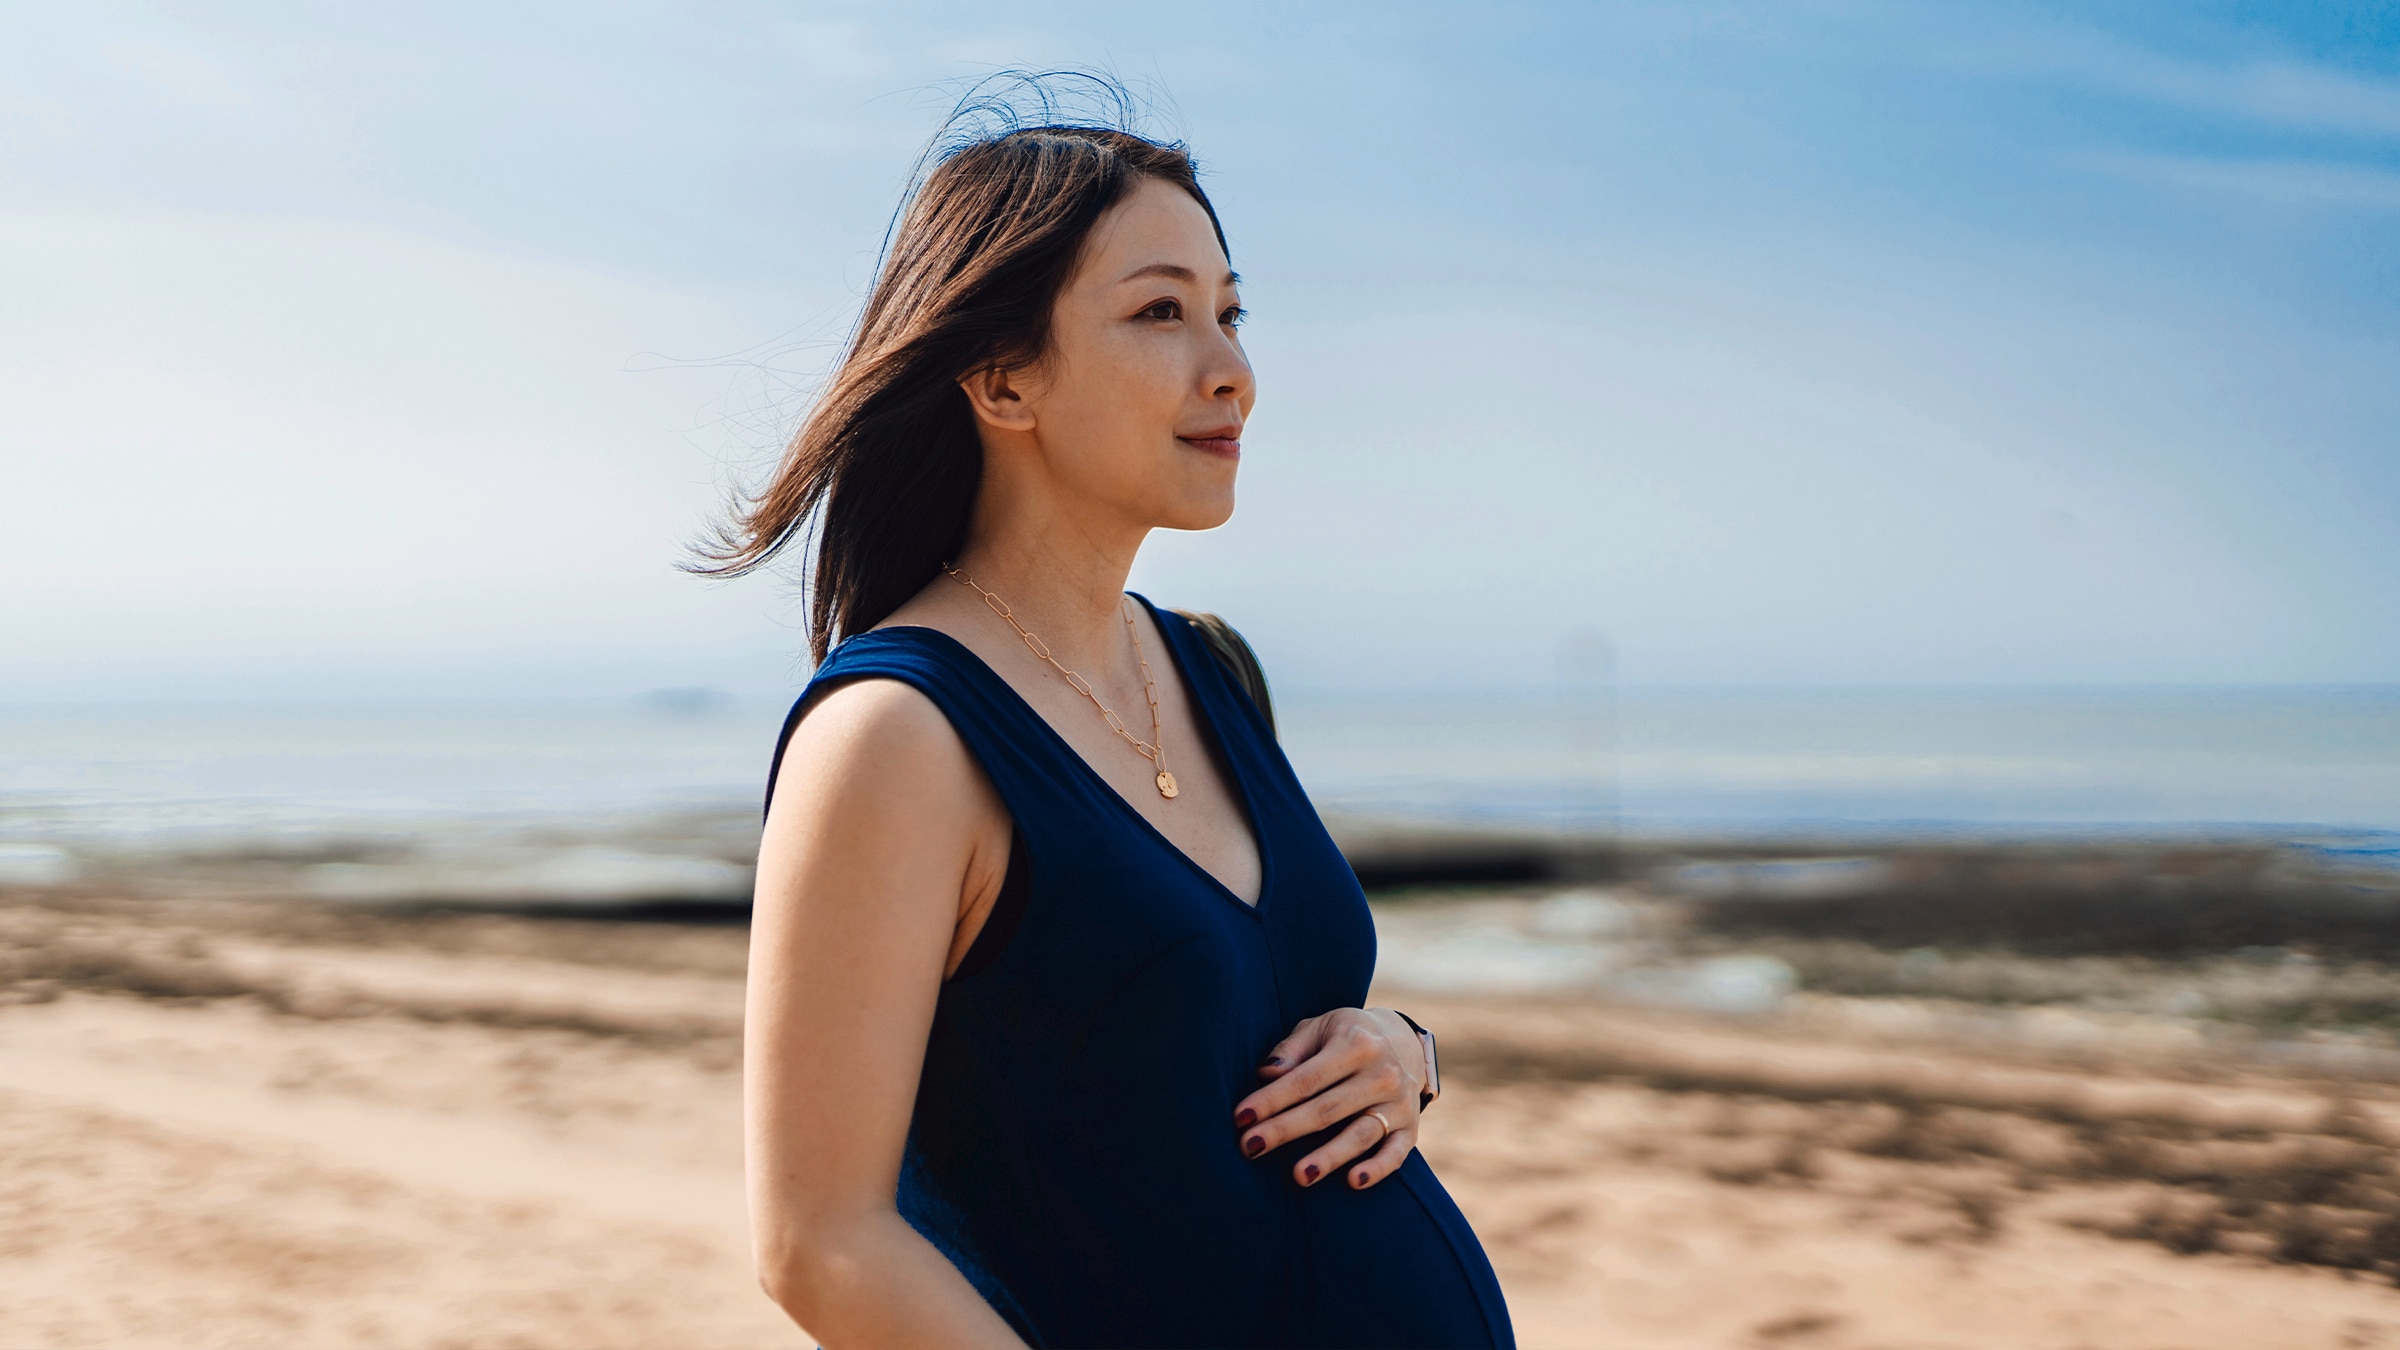 A side shot of a woman at the beach. She has her hand on top of her stomach and appears to be pregnant.